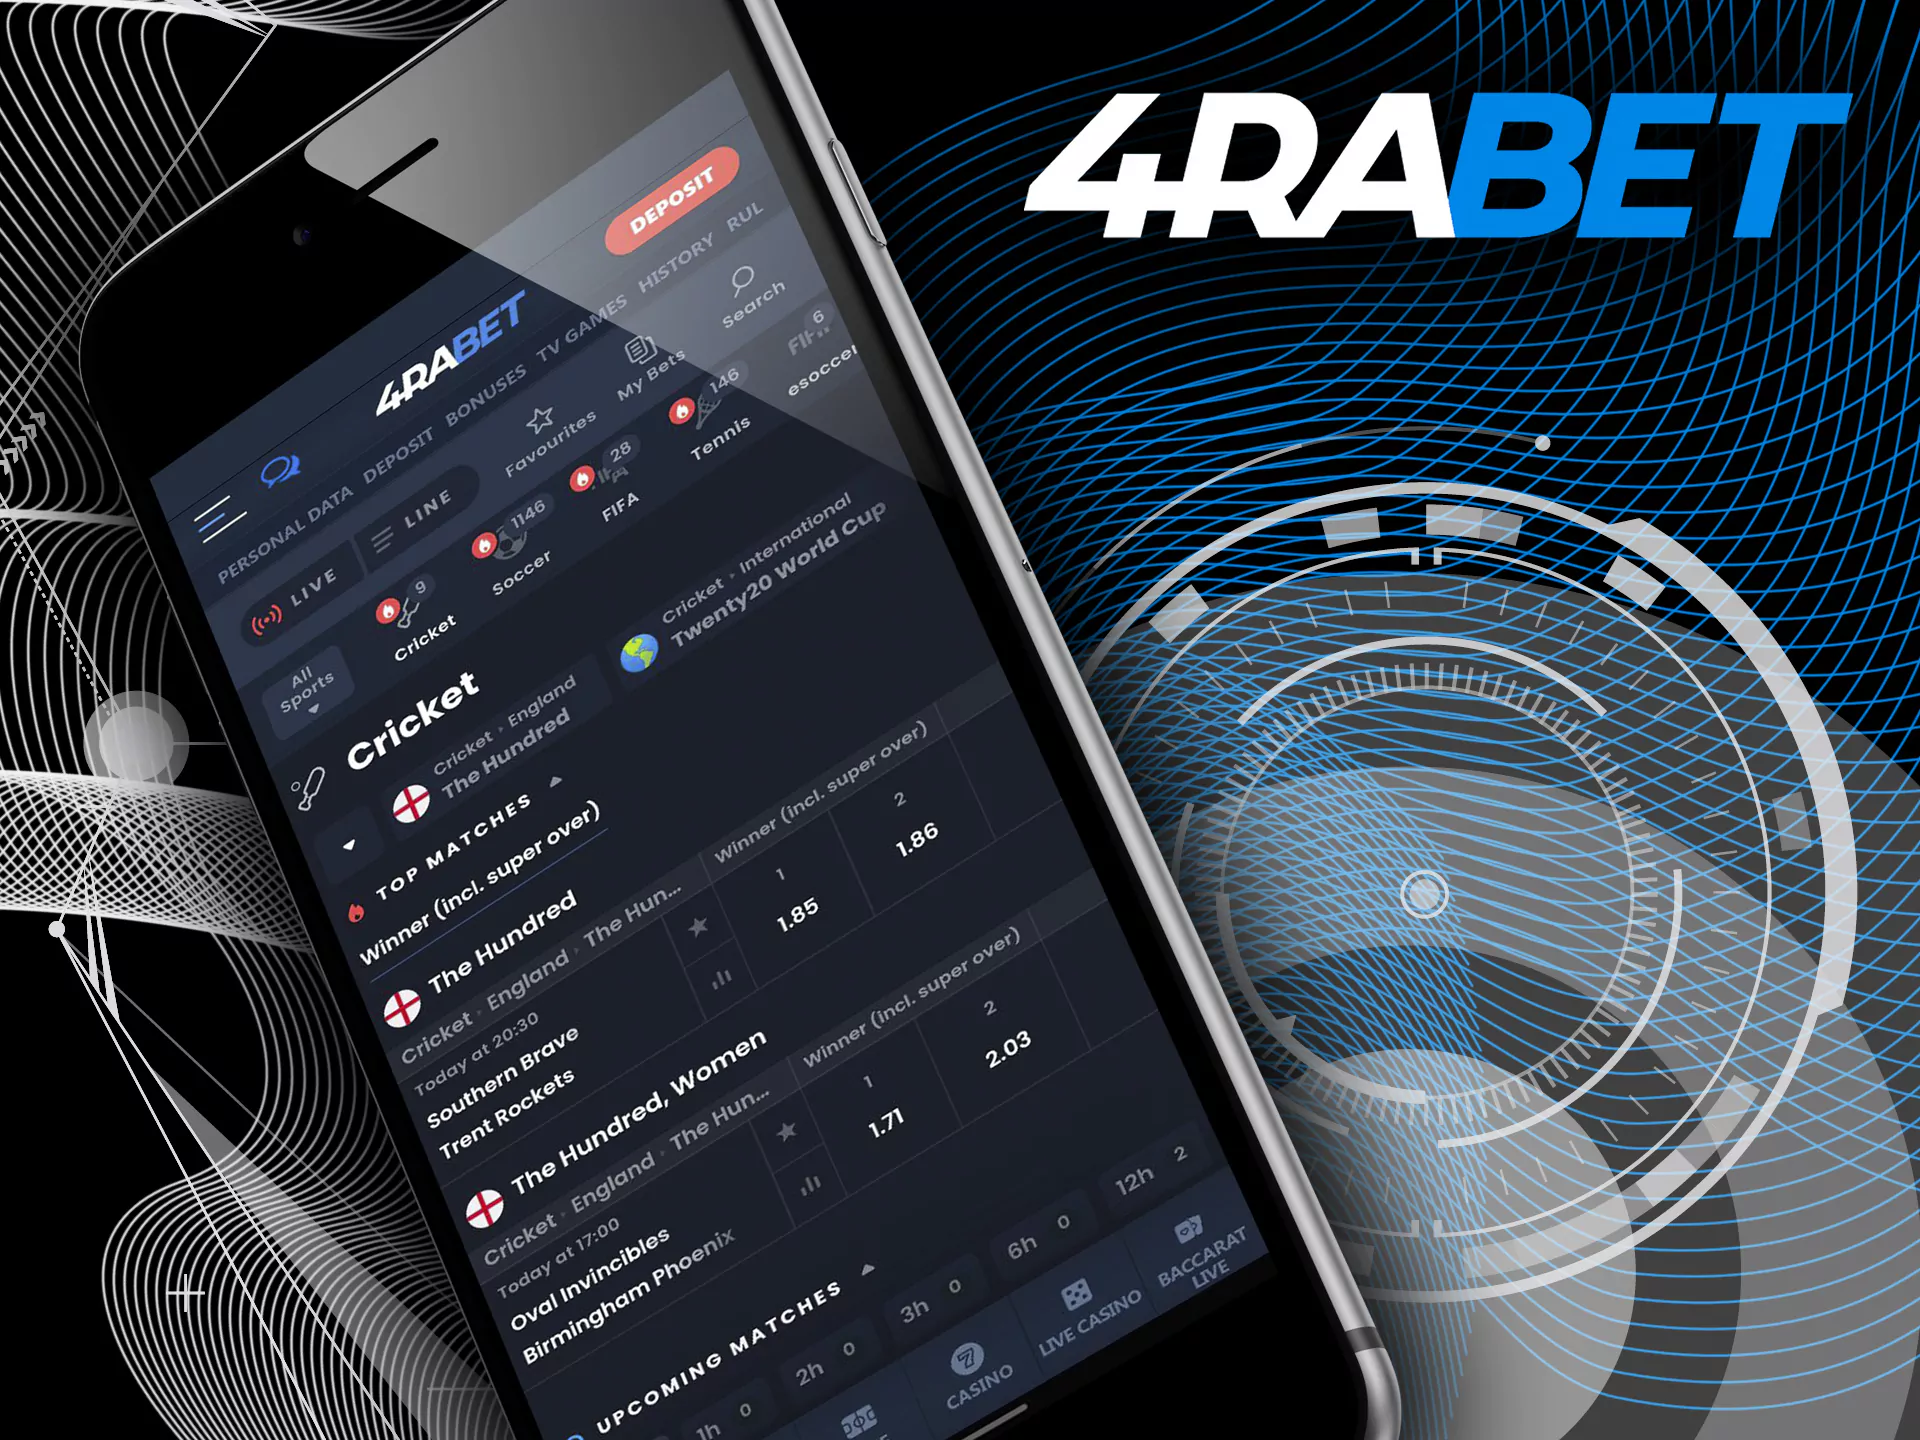 Sign up for 4rabet and start betting.